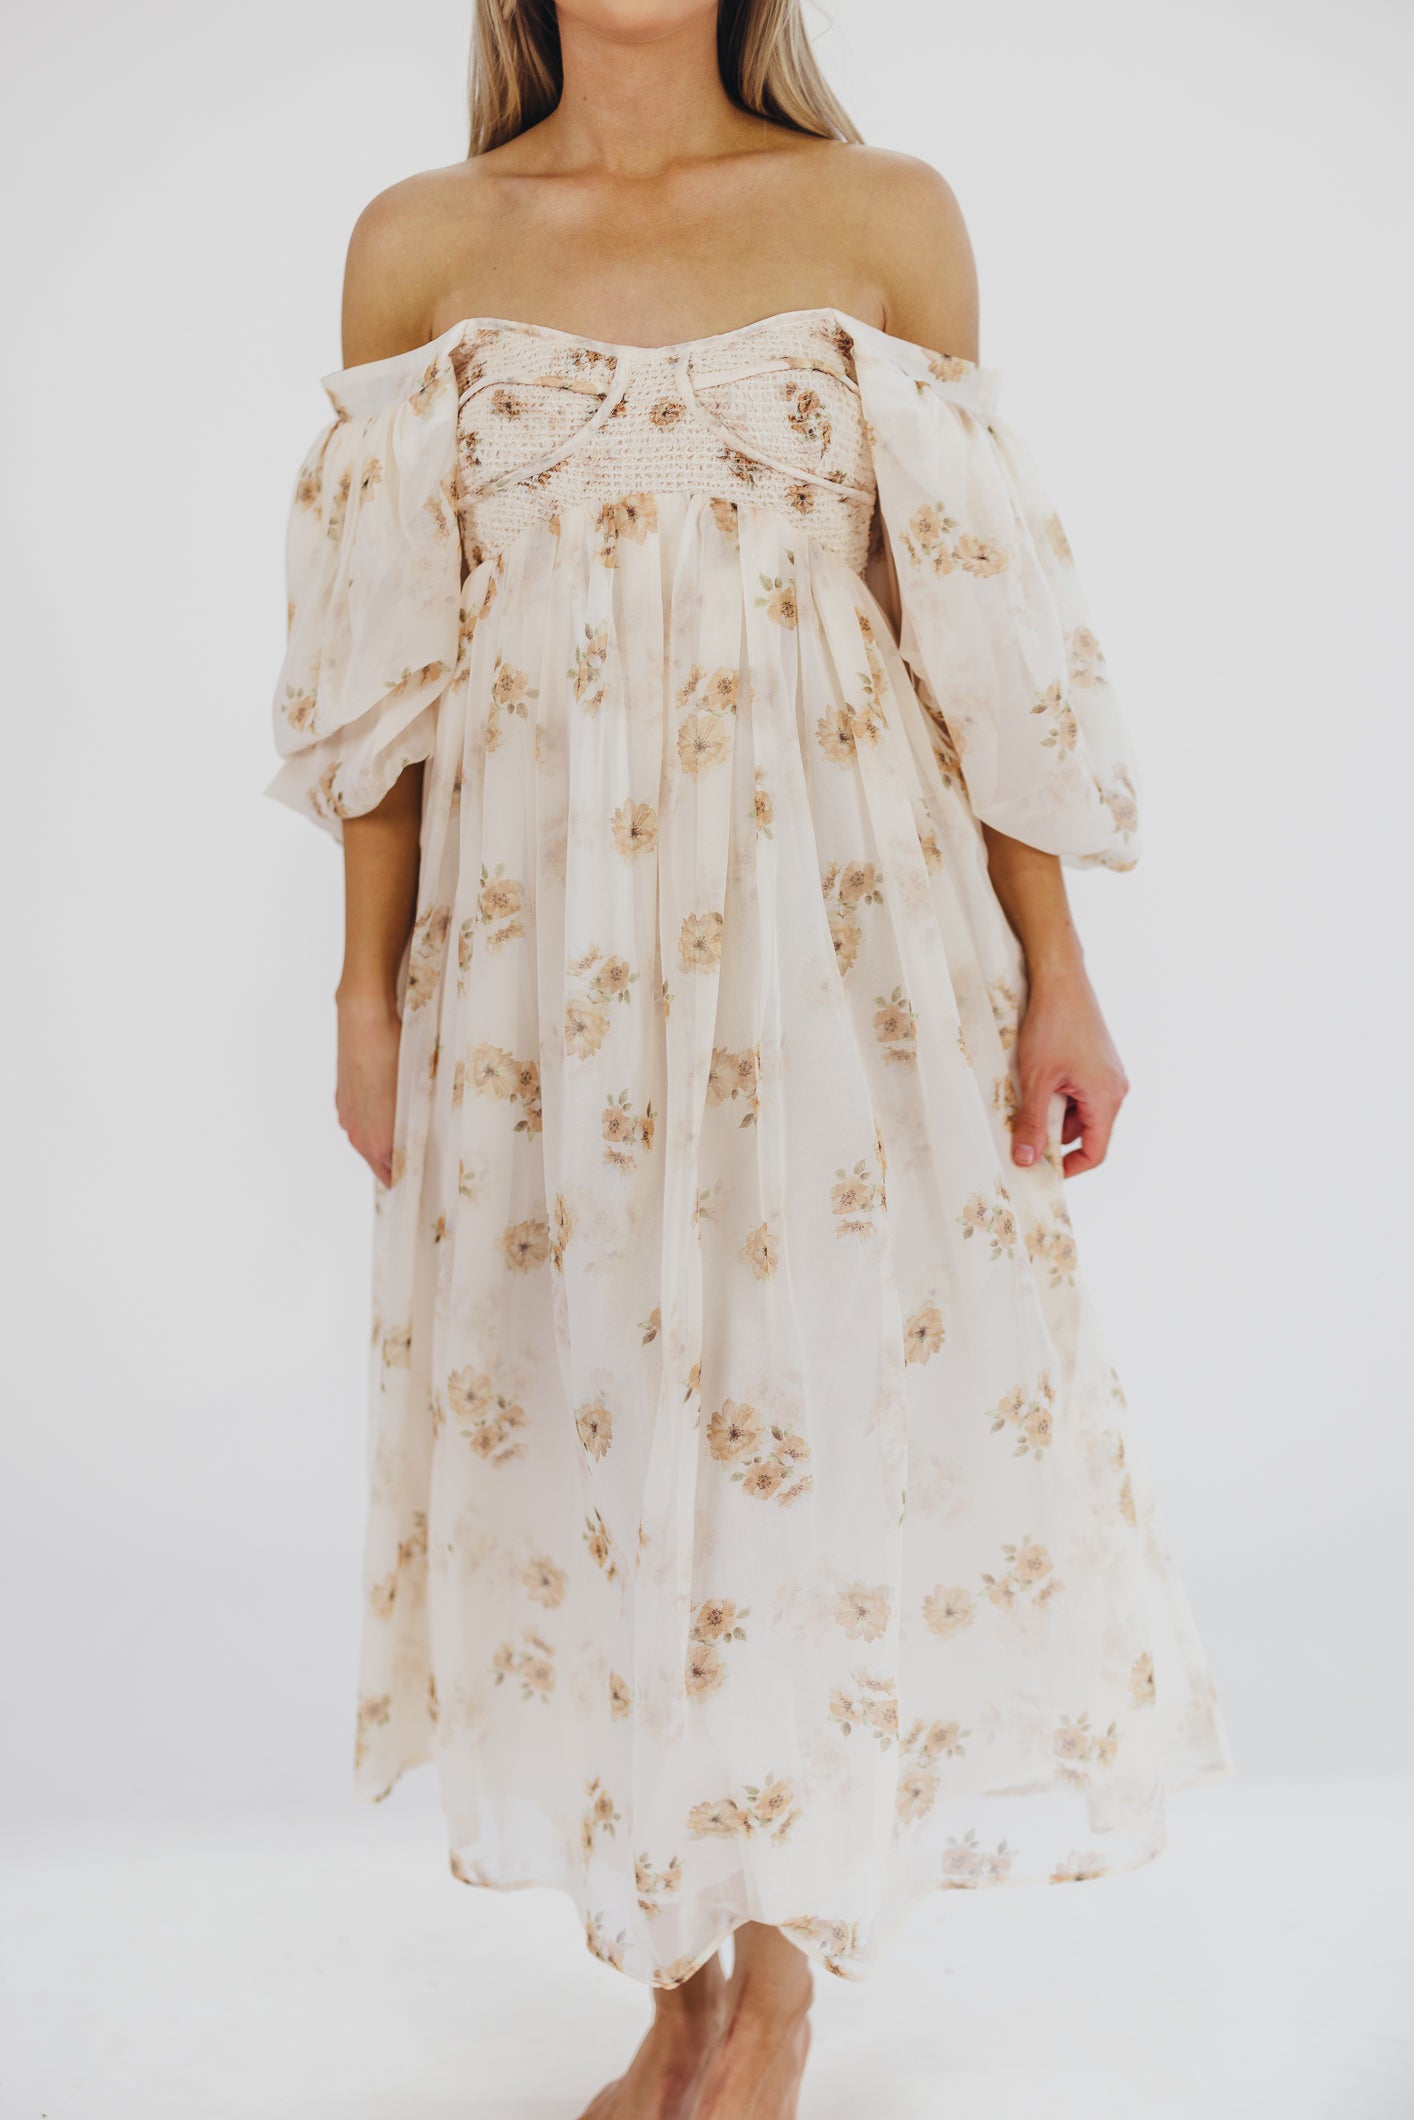 Harlow Maxi Dress in Taupe Floral - Bump Friendly & Inclusive Sizing (S-3XL)